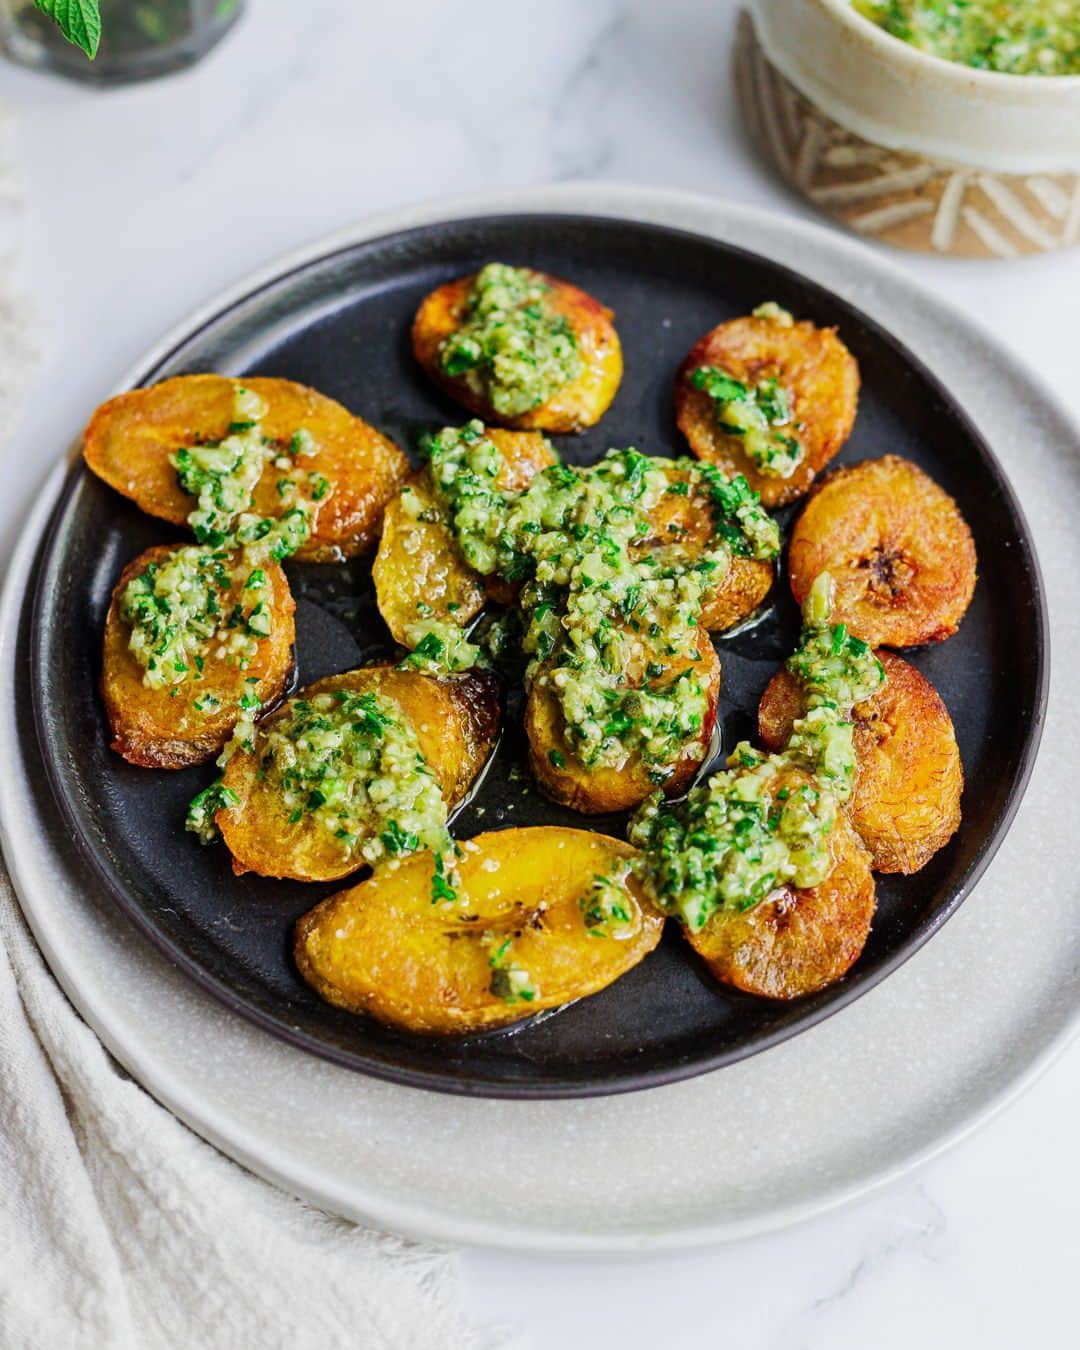 Food Republicさんのインスタグラム写真 - (Food RepublicInstagram)「Sweet Golden Maduros With Mint Mojo Recipe   This dish combines ripe plantains with a zesty mint mojo sauce, a Cuban-inspired condiment that adds a refreshing and tangy twist to your meal.  Recipe developed in collaboration with @immigrantstable   Prep Time: 10 minutes  Cook Time: 20 minutes  Servings: 4 servings  Ingredients: - 2 ripe plantains - Oil, for frying - ½ cup fresh mint leaves - 1 ½ tablespoons lemon juice - 2 tablespoons orange juice - 2 medium garlic cloves - 1 cup parsley - ¼ cup capers - 1 small onion - ½ cup olive oil  Directions: 1. Slice the plantains into ½-inch slices.  2. Set a pan to medium heat. Add enough oil to cover the plantains at least halfway up the sides. Place the plantain slices in the pan, forming a single layer (work in batches if necessary). Fry for 3-5 minutes, until the plantains are golden brown on one side.  3. While the plantains fry, add the remaining ingredients to a food processor or high-speed blender. Blender until a smooth texture is achieved.  4. Flip the plantains and fry on the other side, for 2-3 minutes. Remove the fried plantains and place them on a paper towel-lined plate to absorb excess oil. Repeat with remaining plantains.  5. Serve fried plantains with sauce.  -  #recipes #recipeoftheday #cooking #easyrecipe #delicious #food #yum #easyrecipes #yummy #healthyrecipe #instafood #healthyrecipes #foodie #tasty #homemade #dinnerisserved #easydinner #easydinneridea #easydinnerideas #eatup #dinnertime #dinnerdate #dinnertonight #dinnerinspo #dinnerset #dinneridea #dinnerprep #dinnertable #dinnerwithfriends」10月18日 2時05分 - foodrepublic